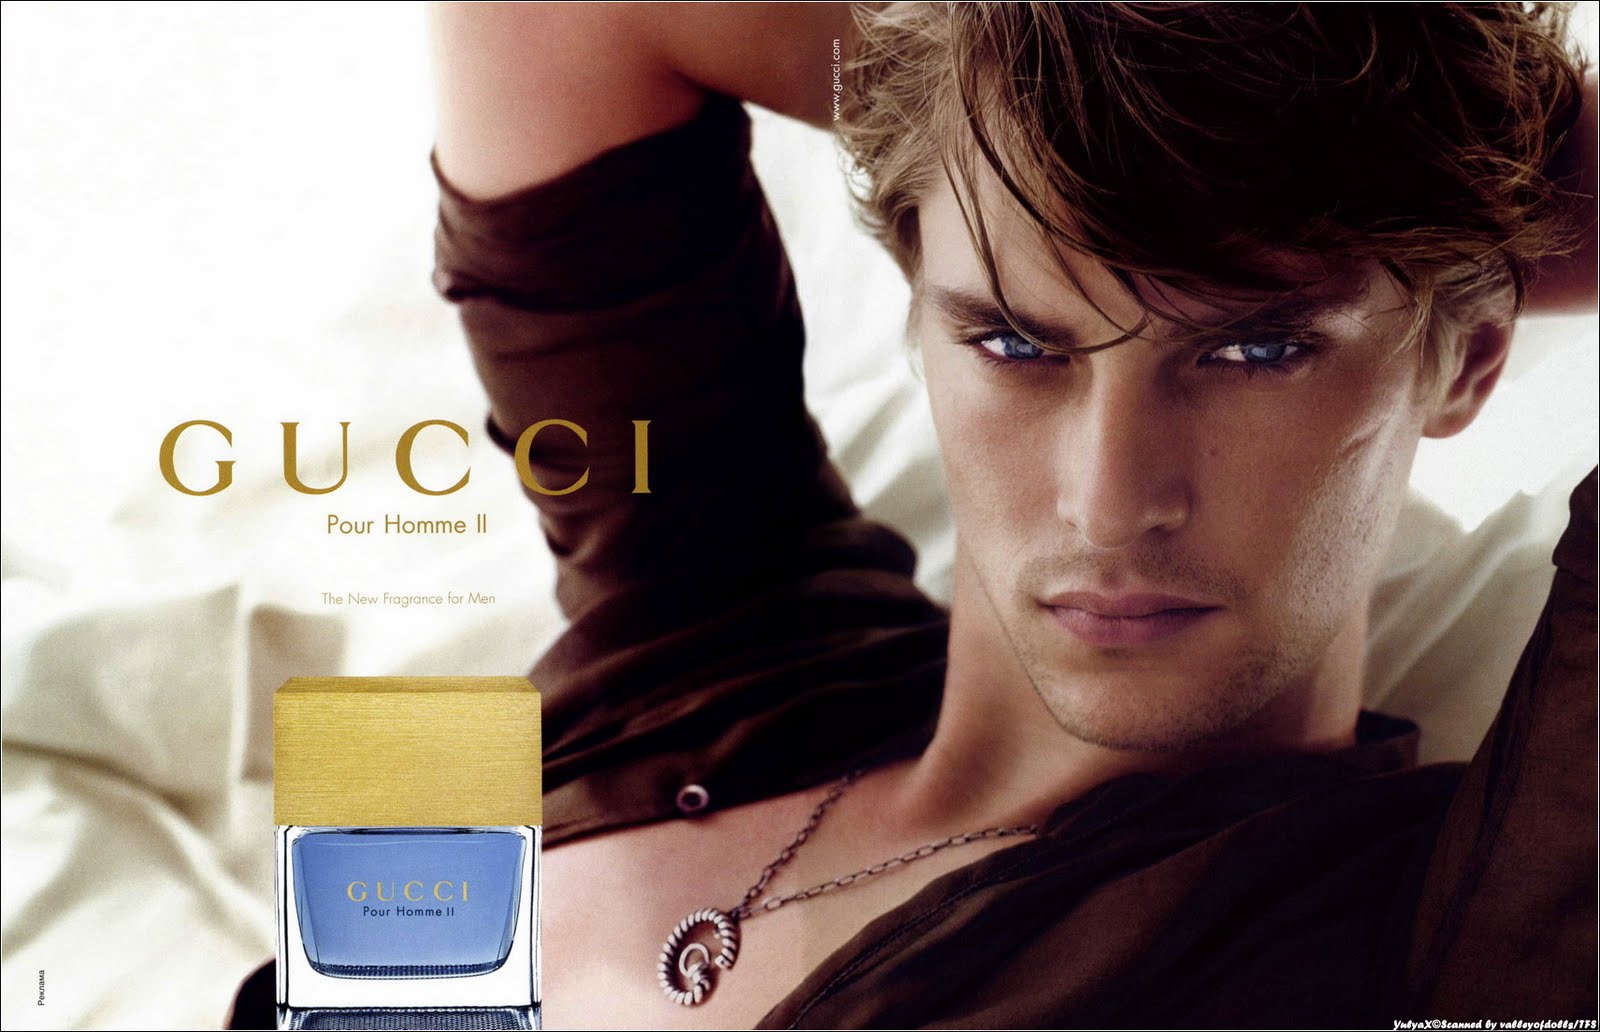 Pour homme 2. Матиас Лауридсен. Gucci pour homme II. Матиас Лауридсен Gucci реклама.